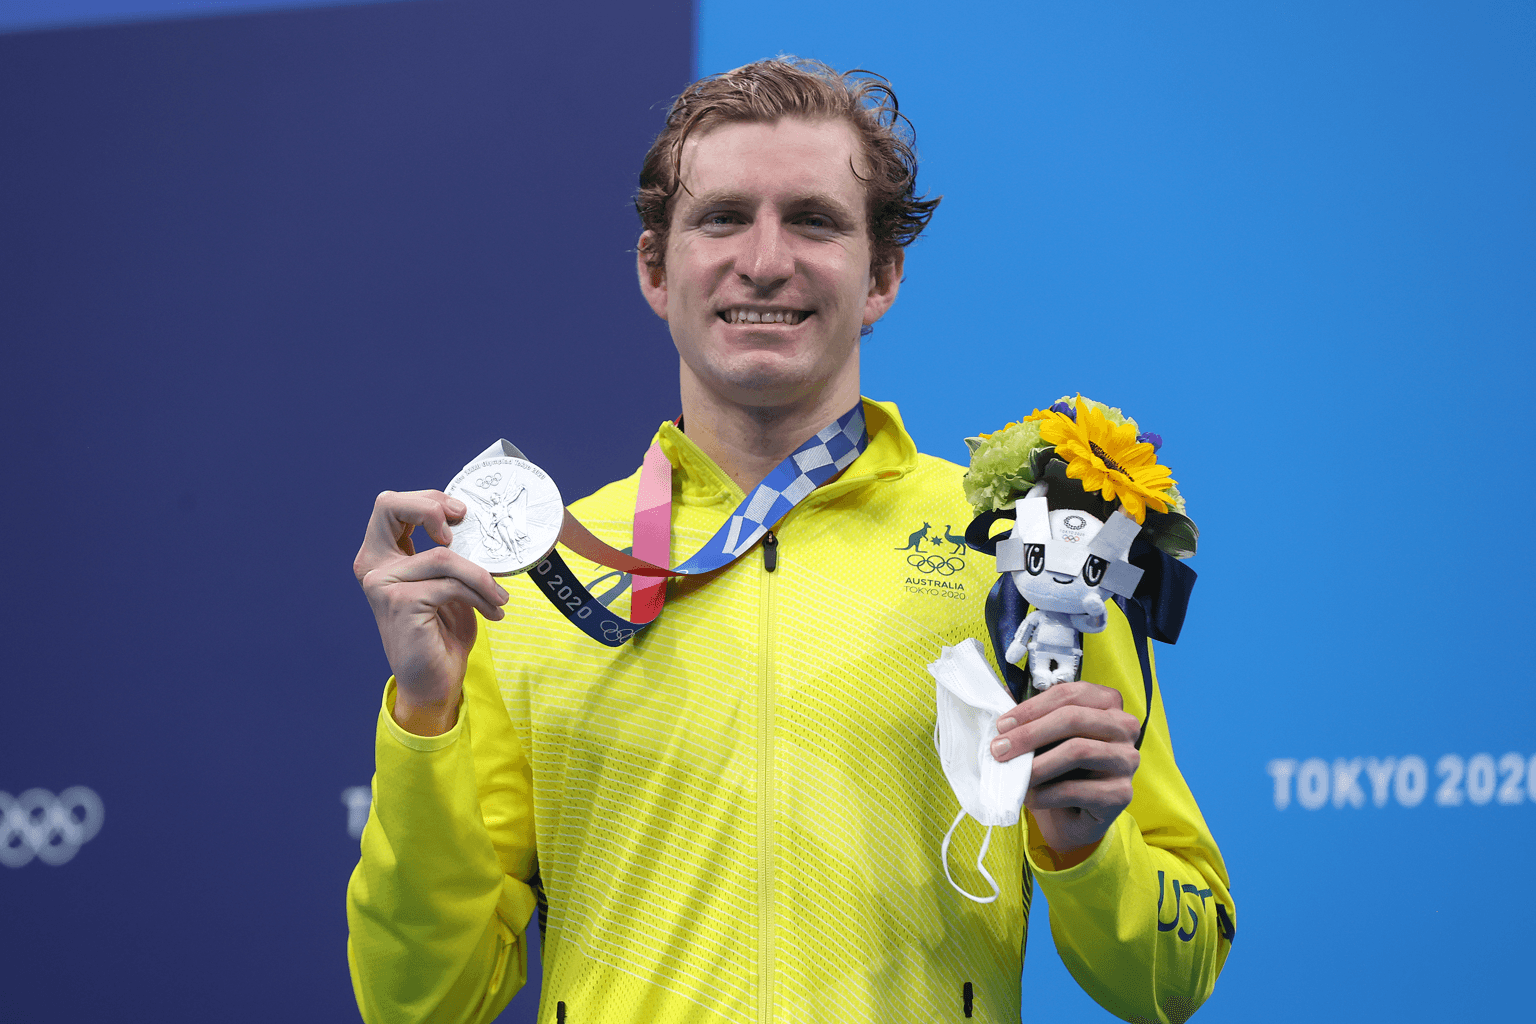 Australian Swimmer Jack McLoughlin holds up a silver medal and a toy mascot from the Tokyo 2020 Olympic Games.